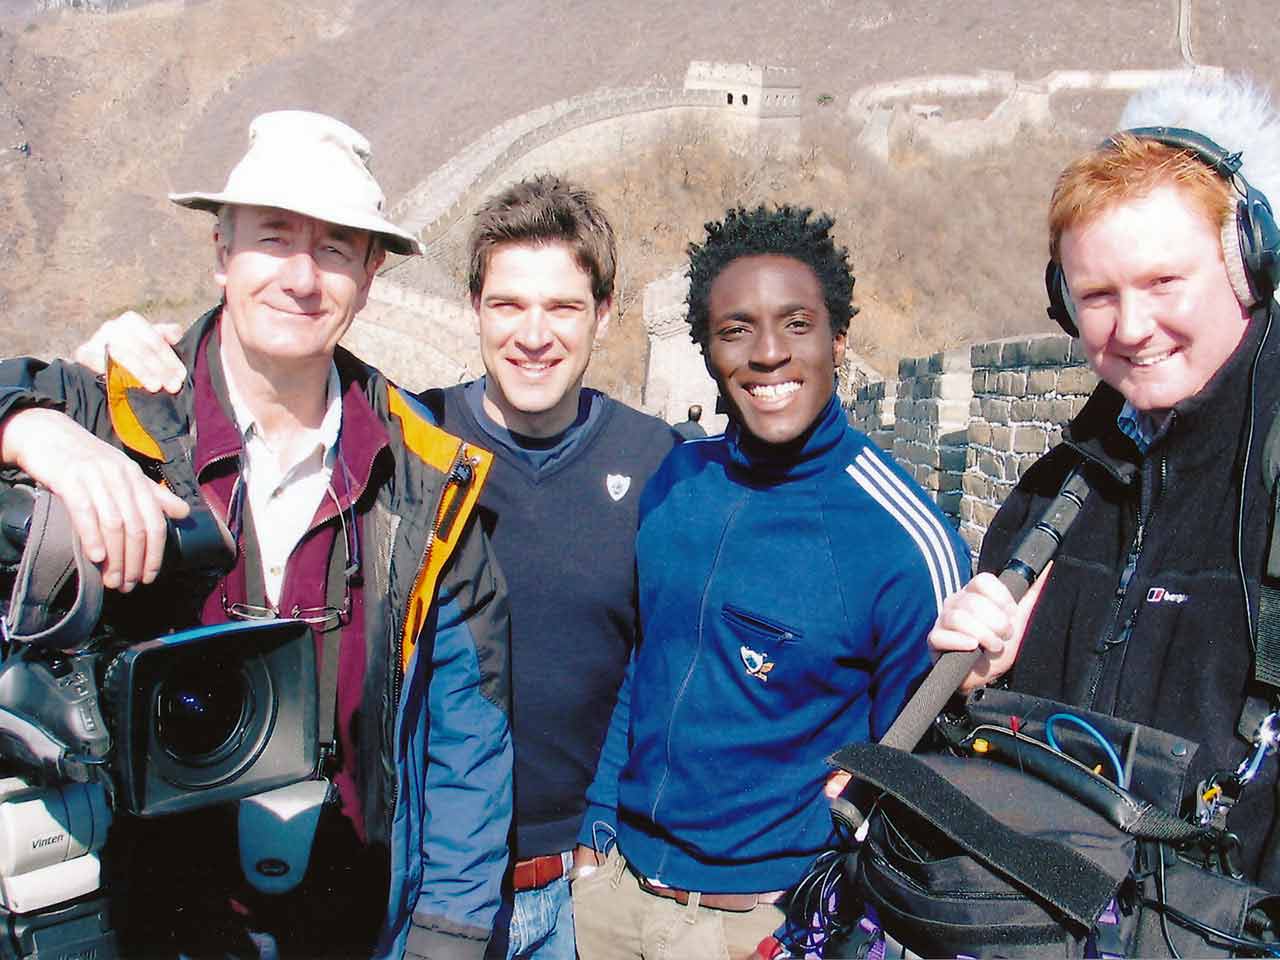 ALex Leger with the Blue Peter team on the Great Wall of China